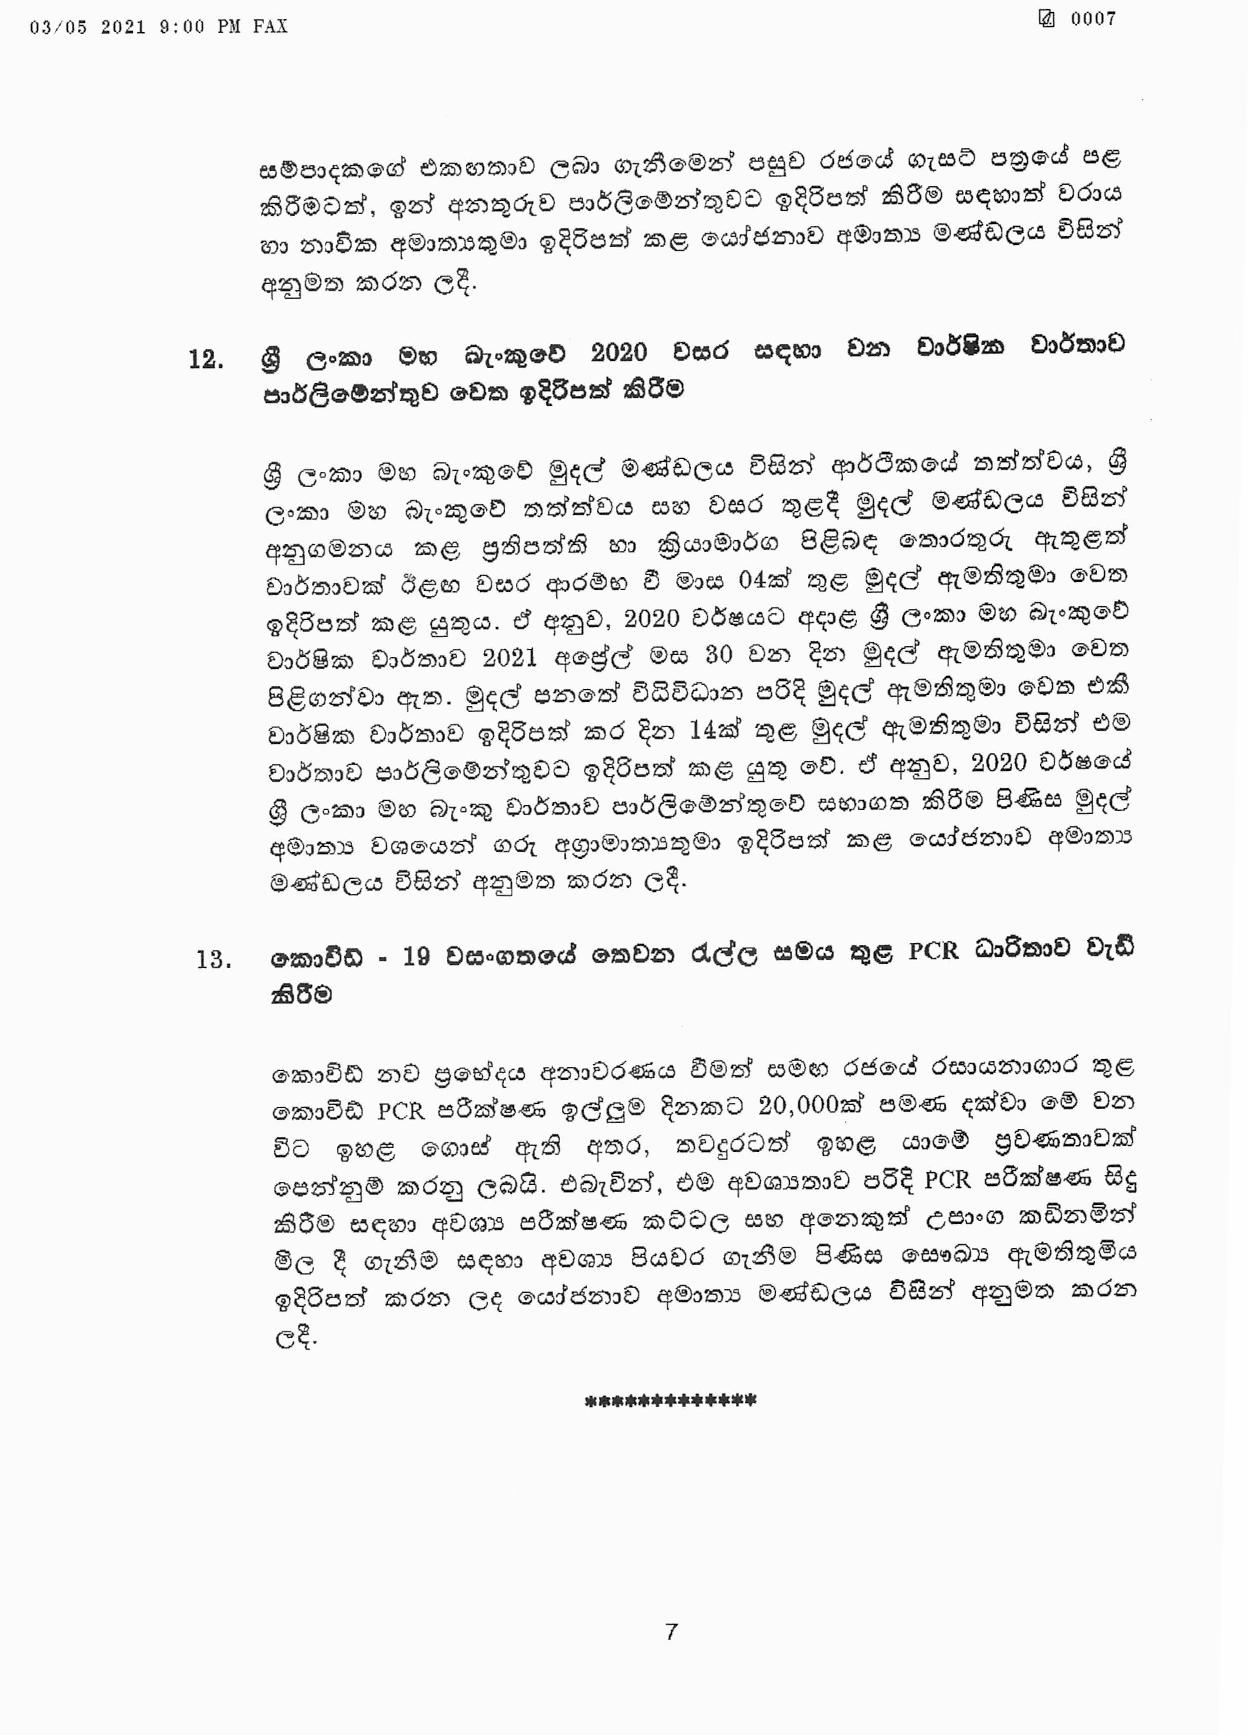 Cabinet Decision on 03.05.2021 page 007